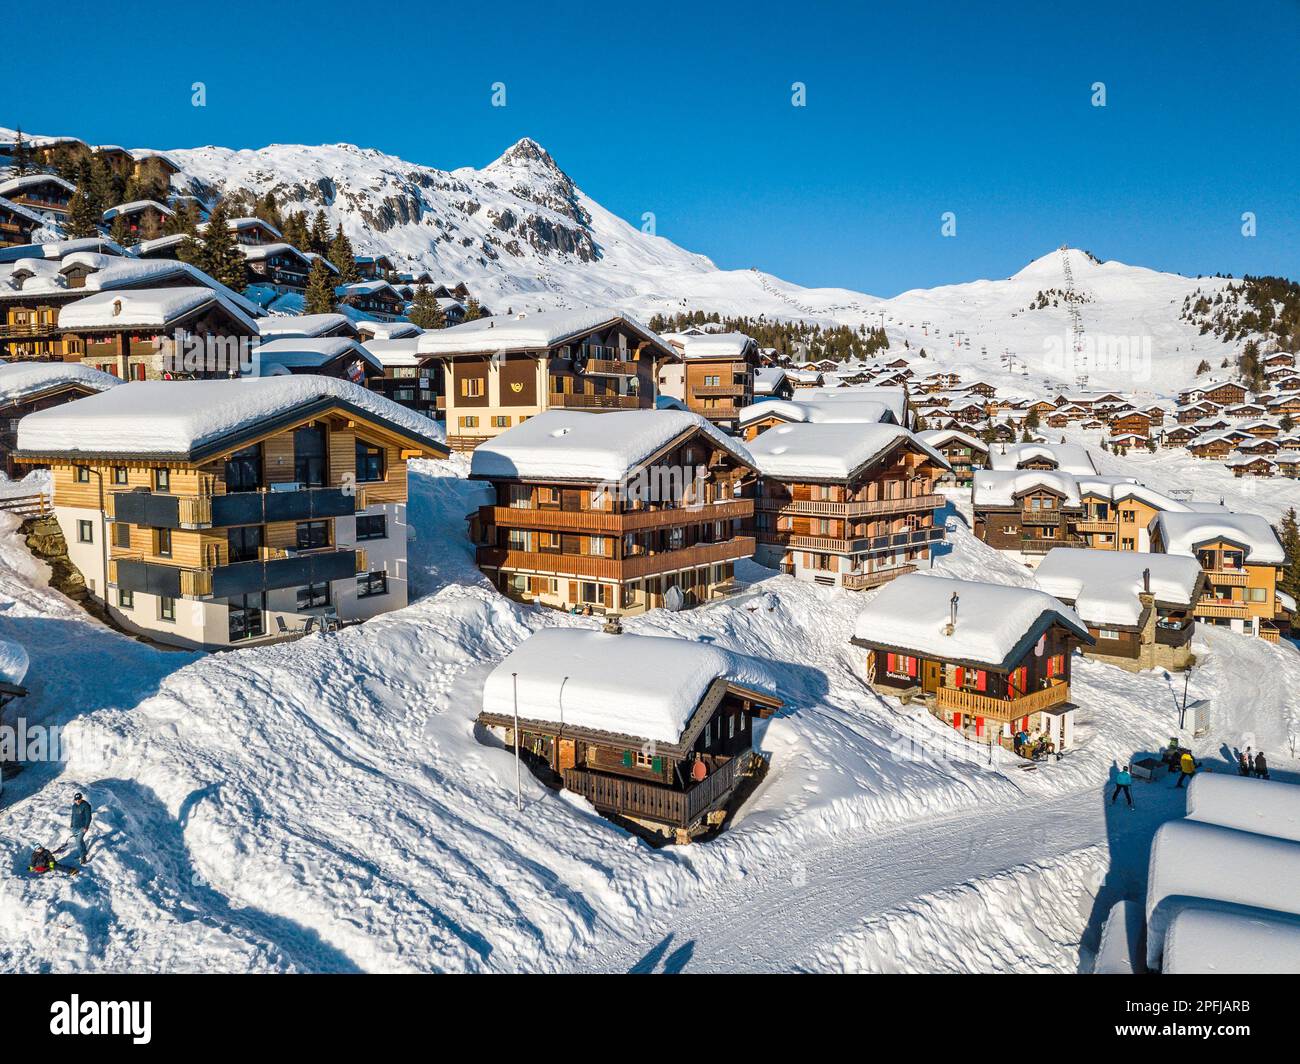 Traditional Wood Decorations in Swiss Alps Stock Image - Image of clock,  chalet: 86954121